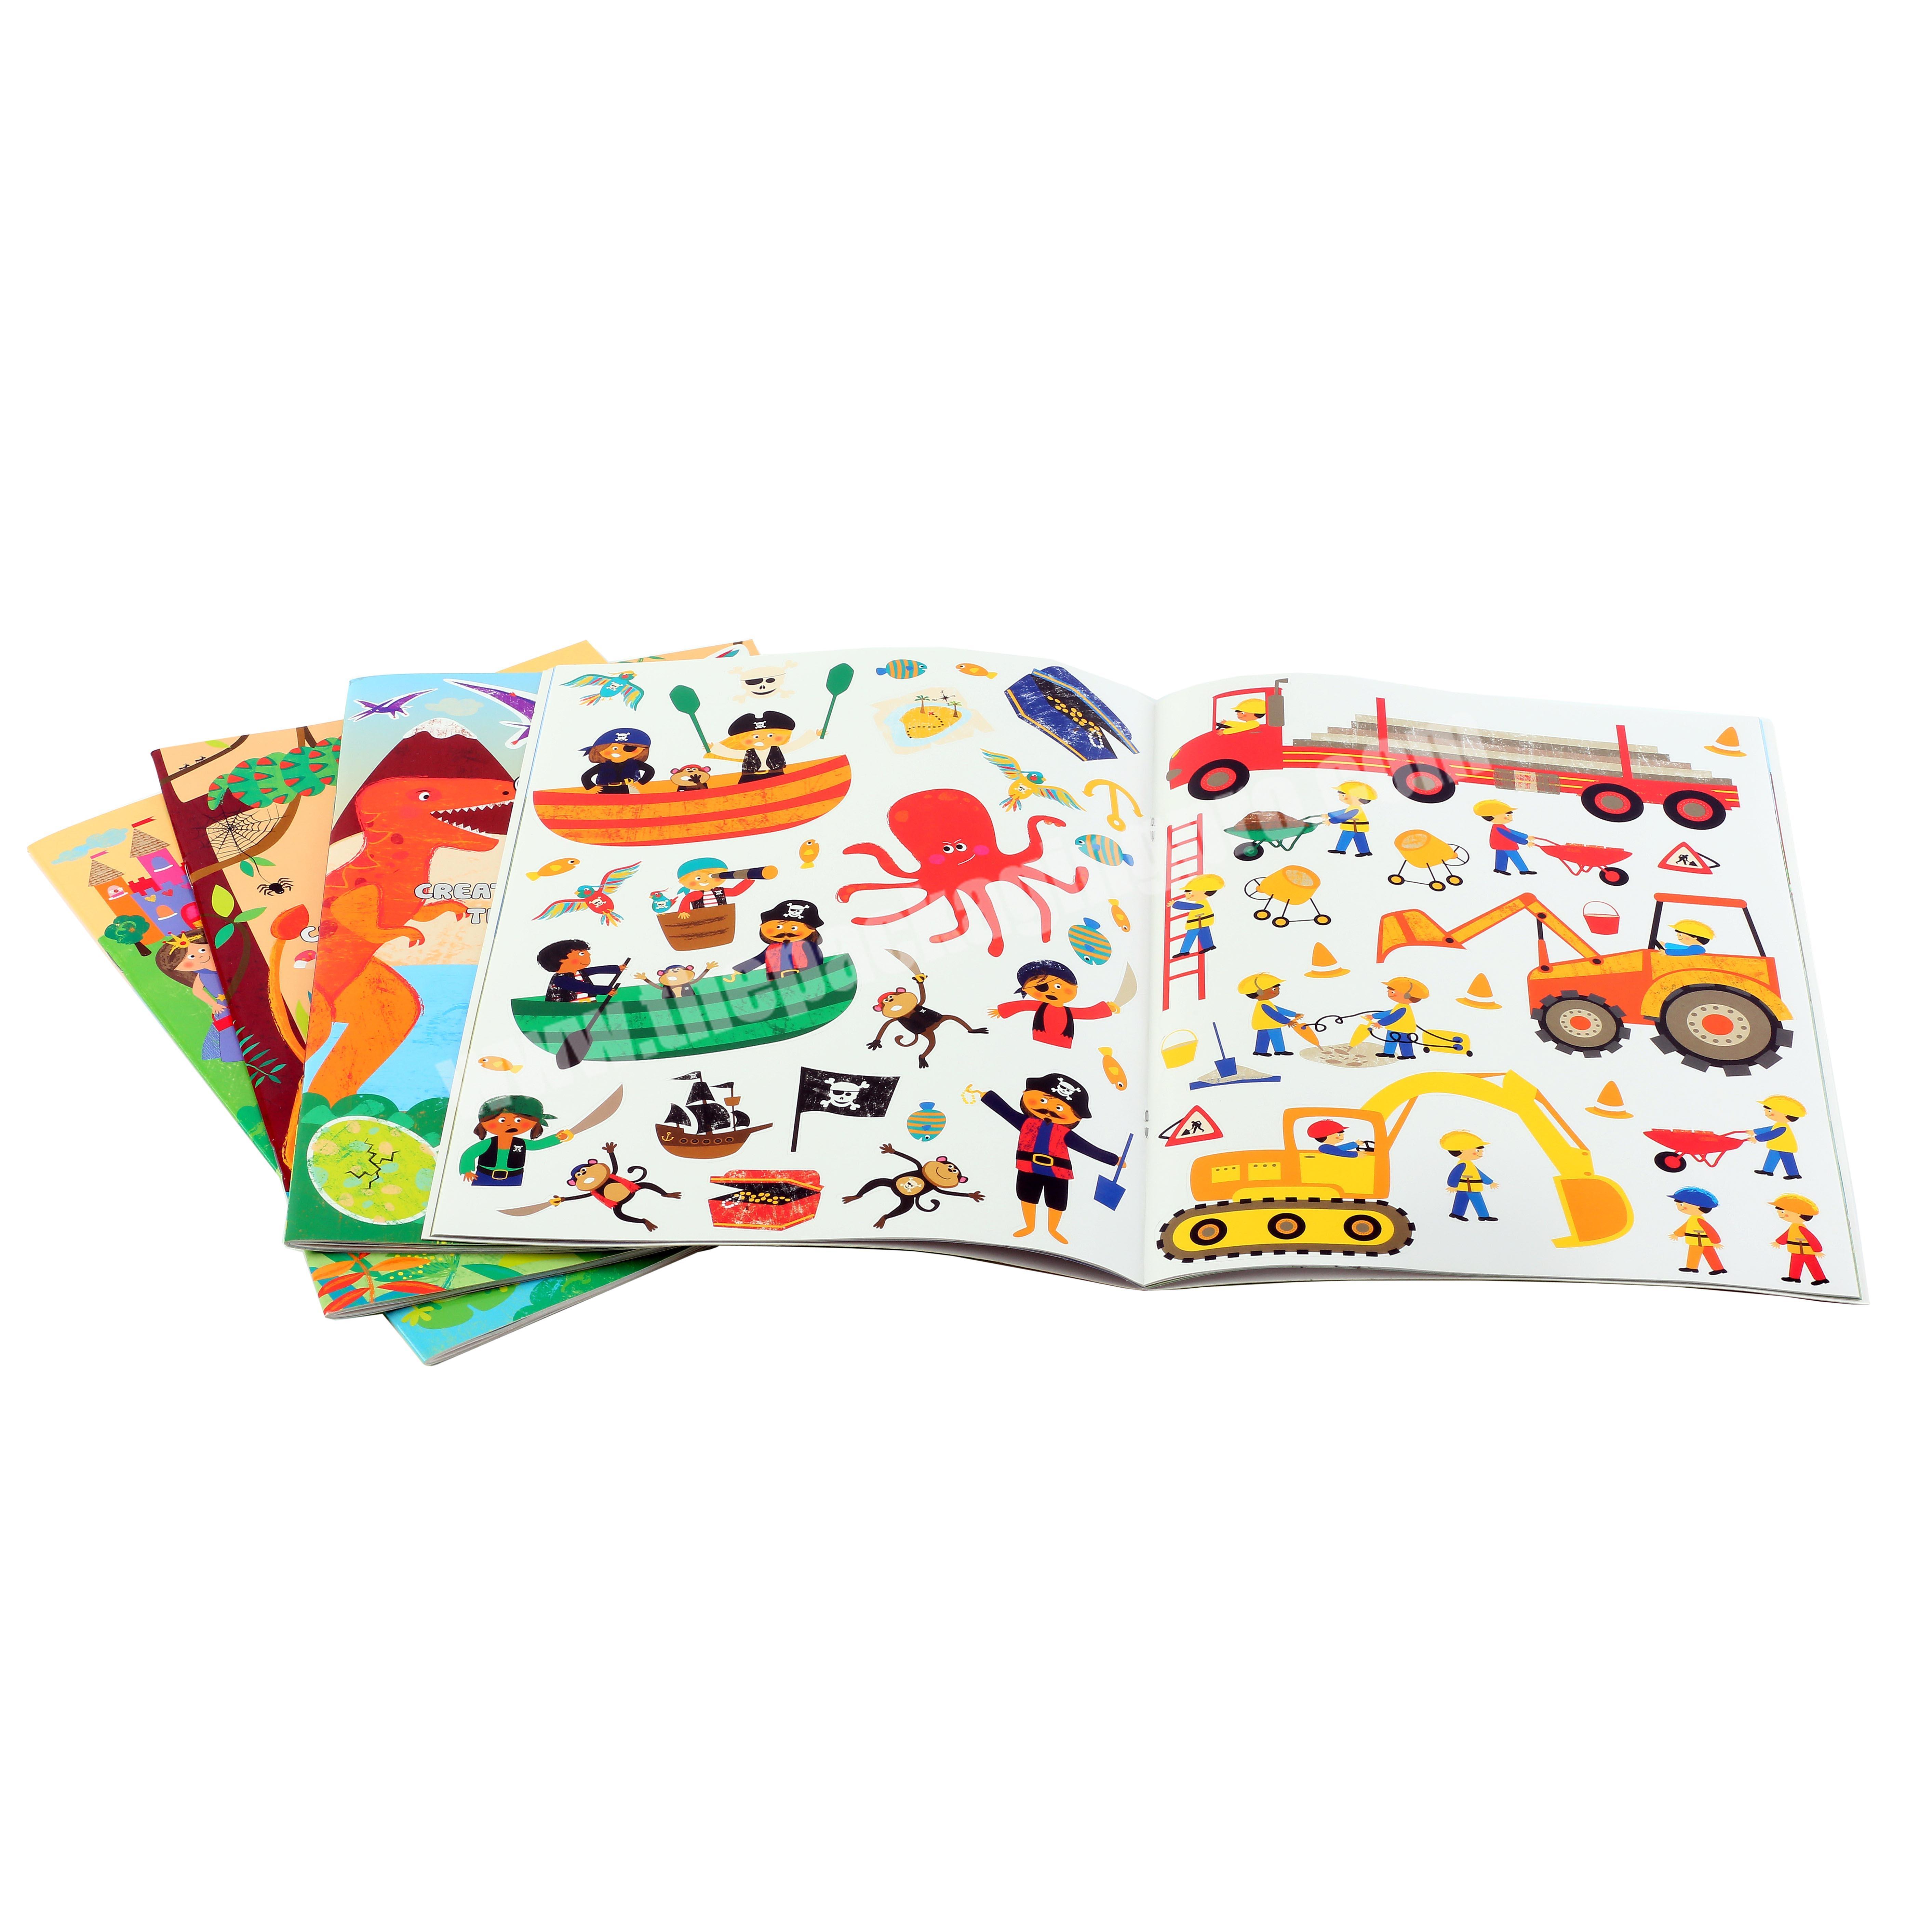 Customized High Quality Printing Children Illustration Picture Books